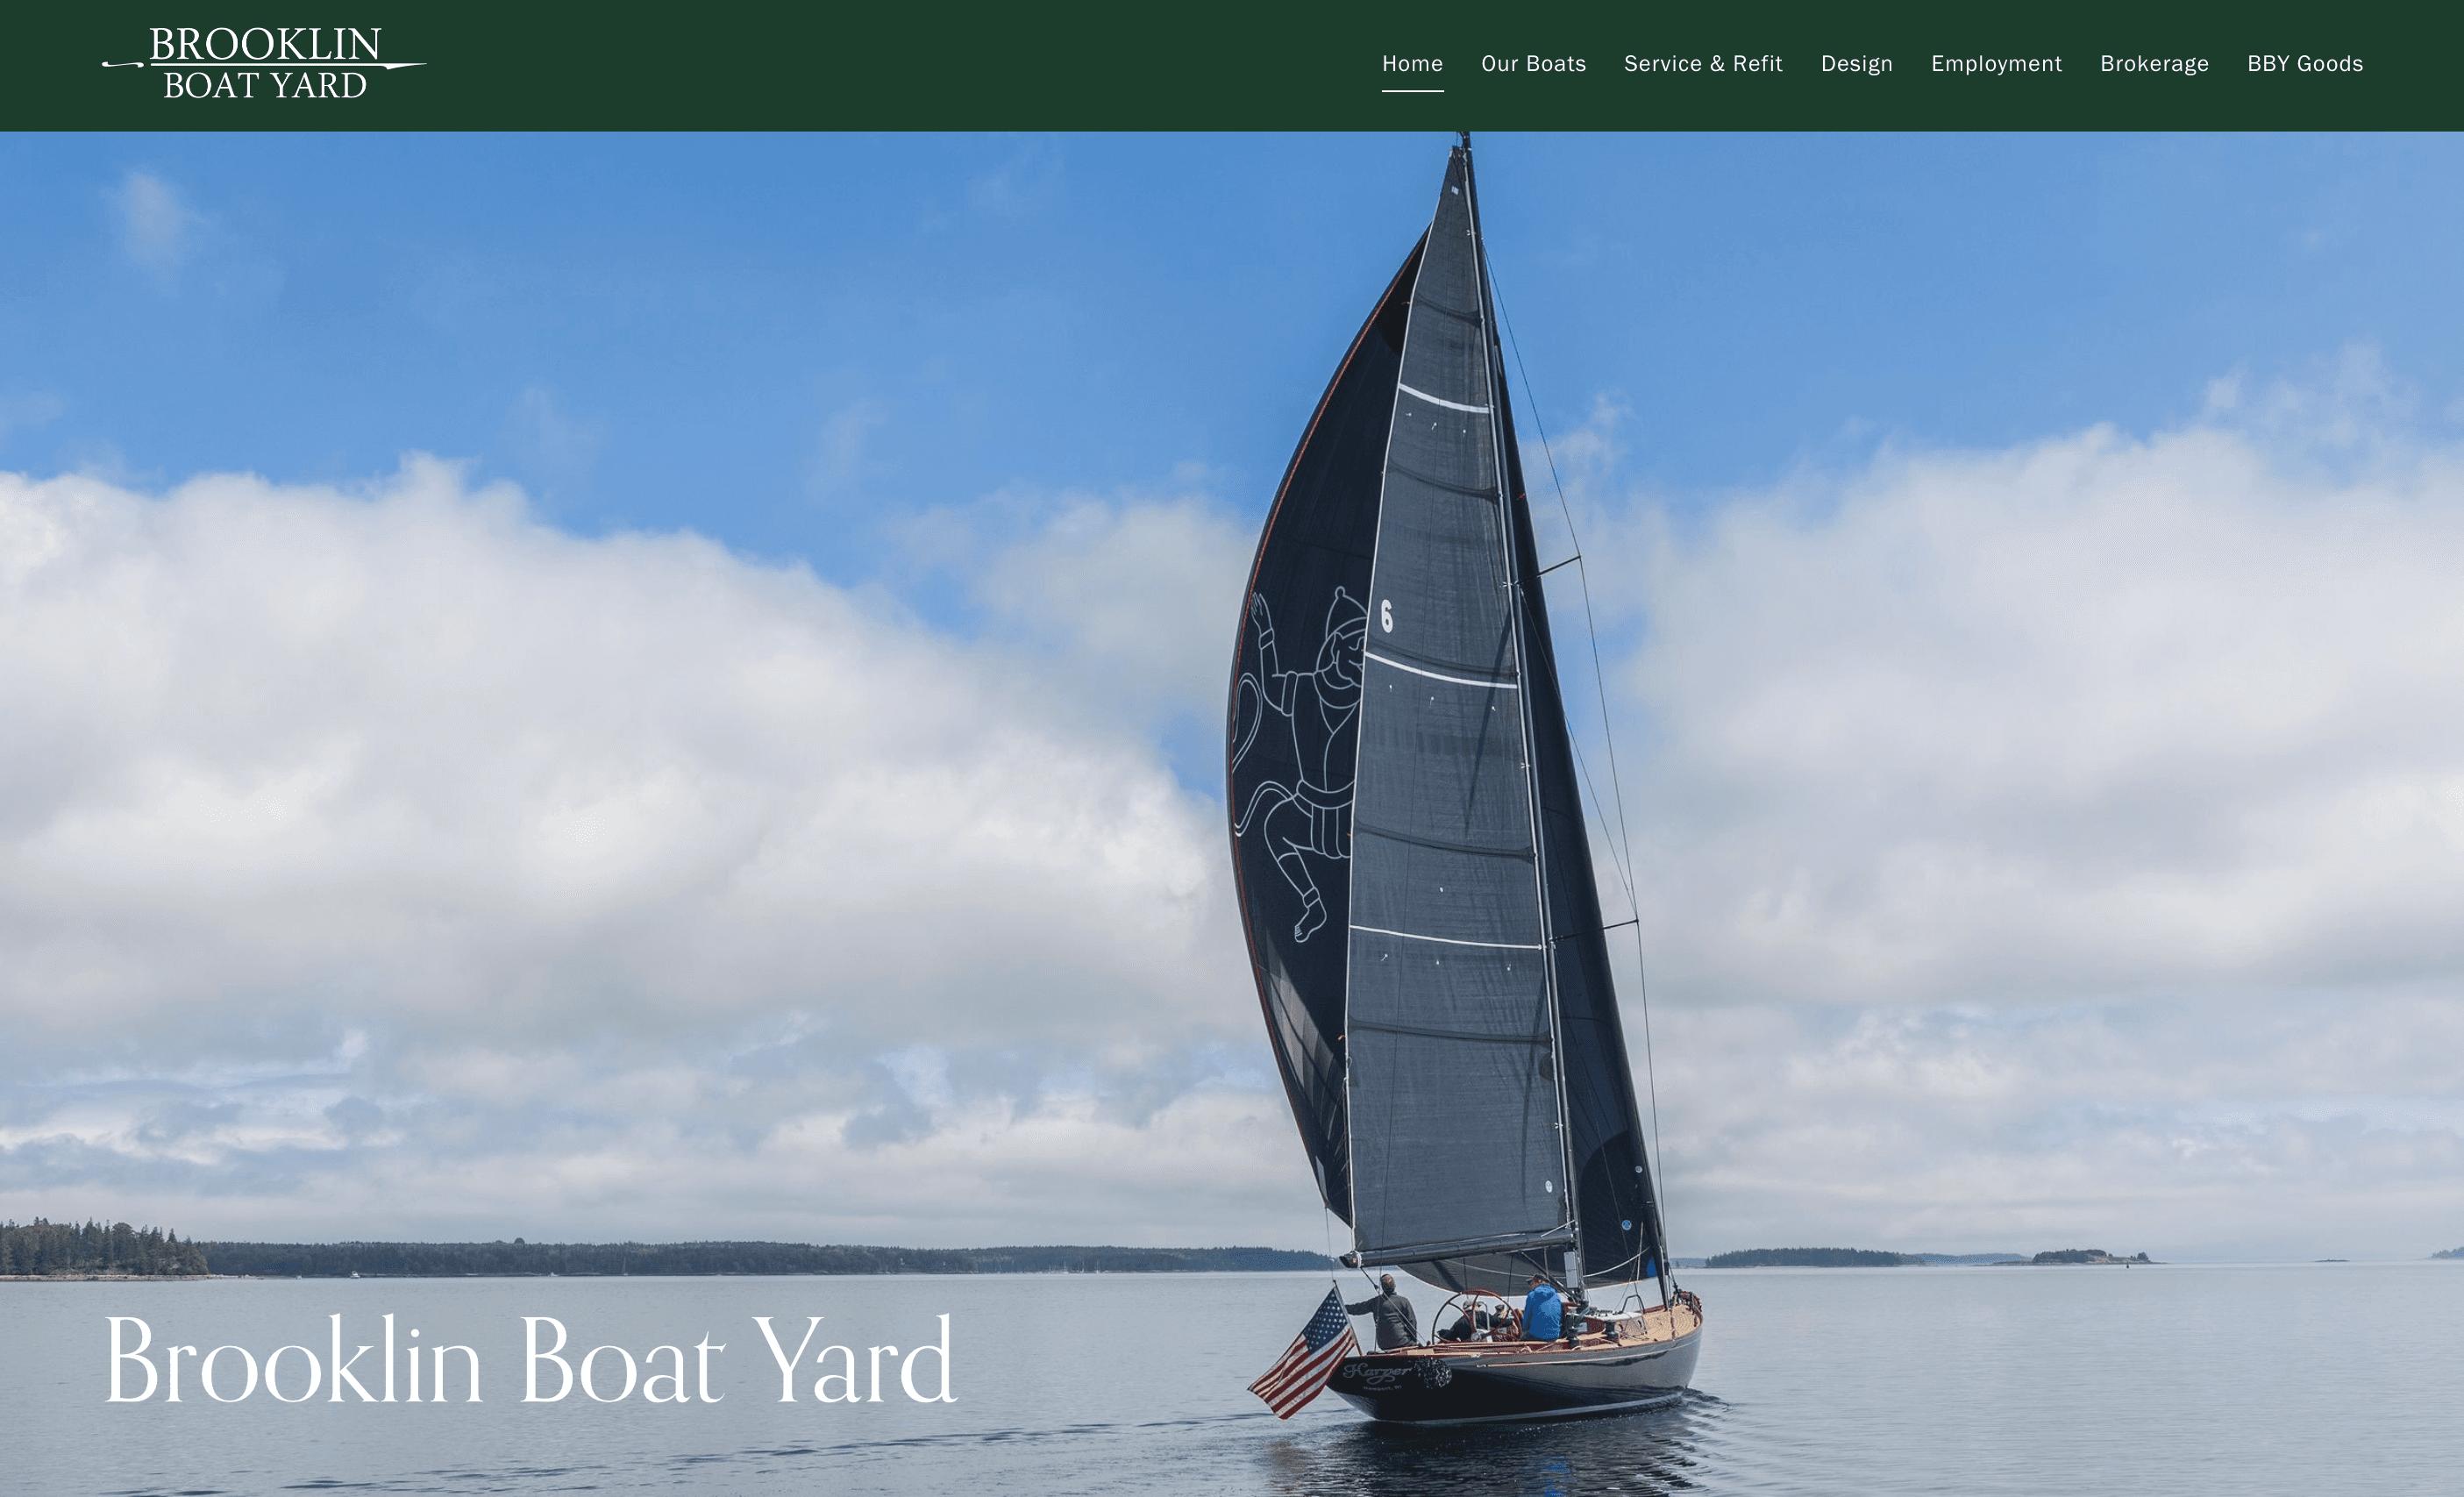 This is the website for the brooklin boat yard boatbuilding company.